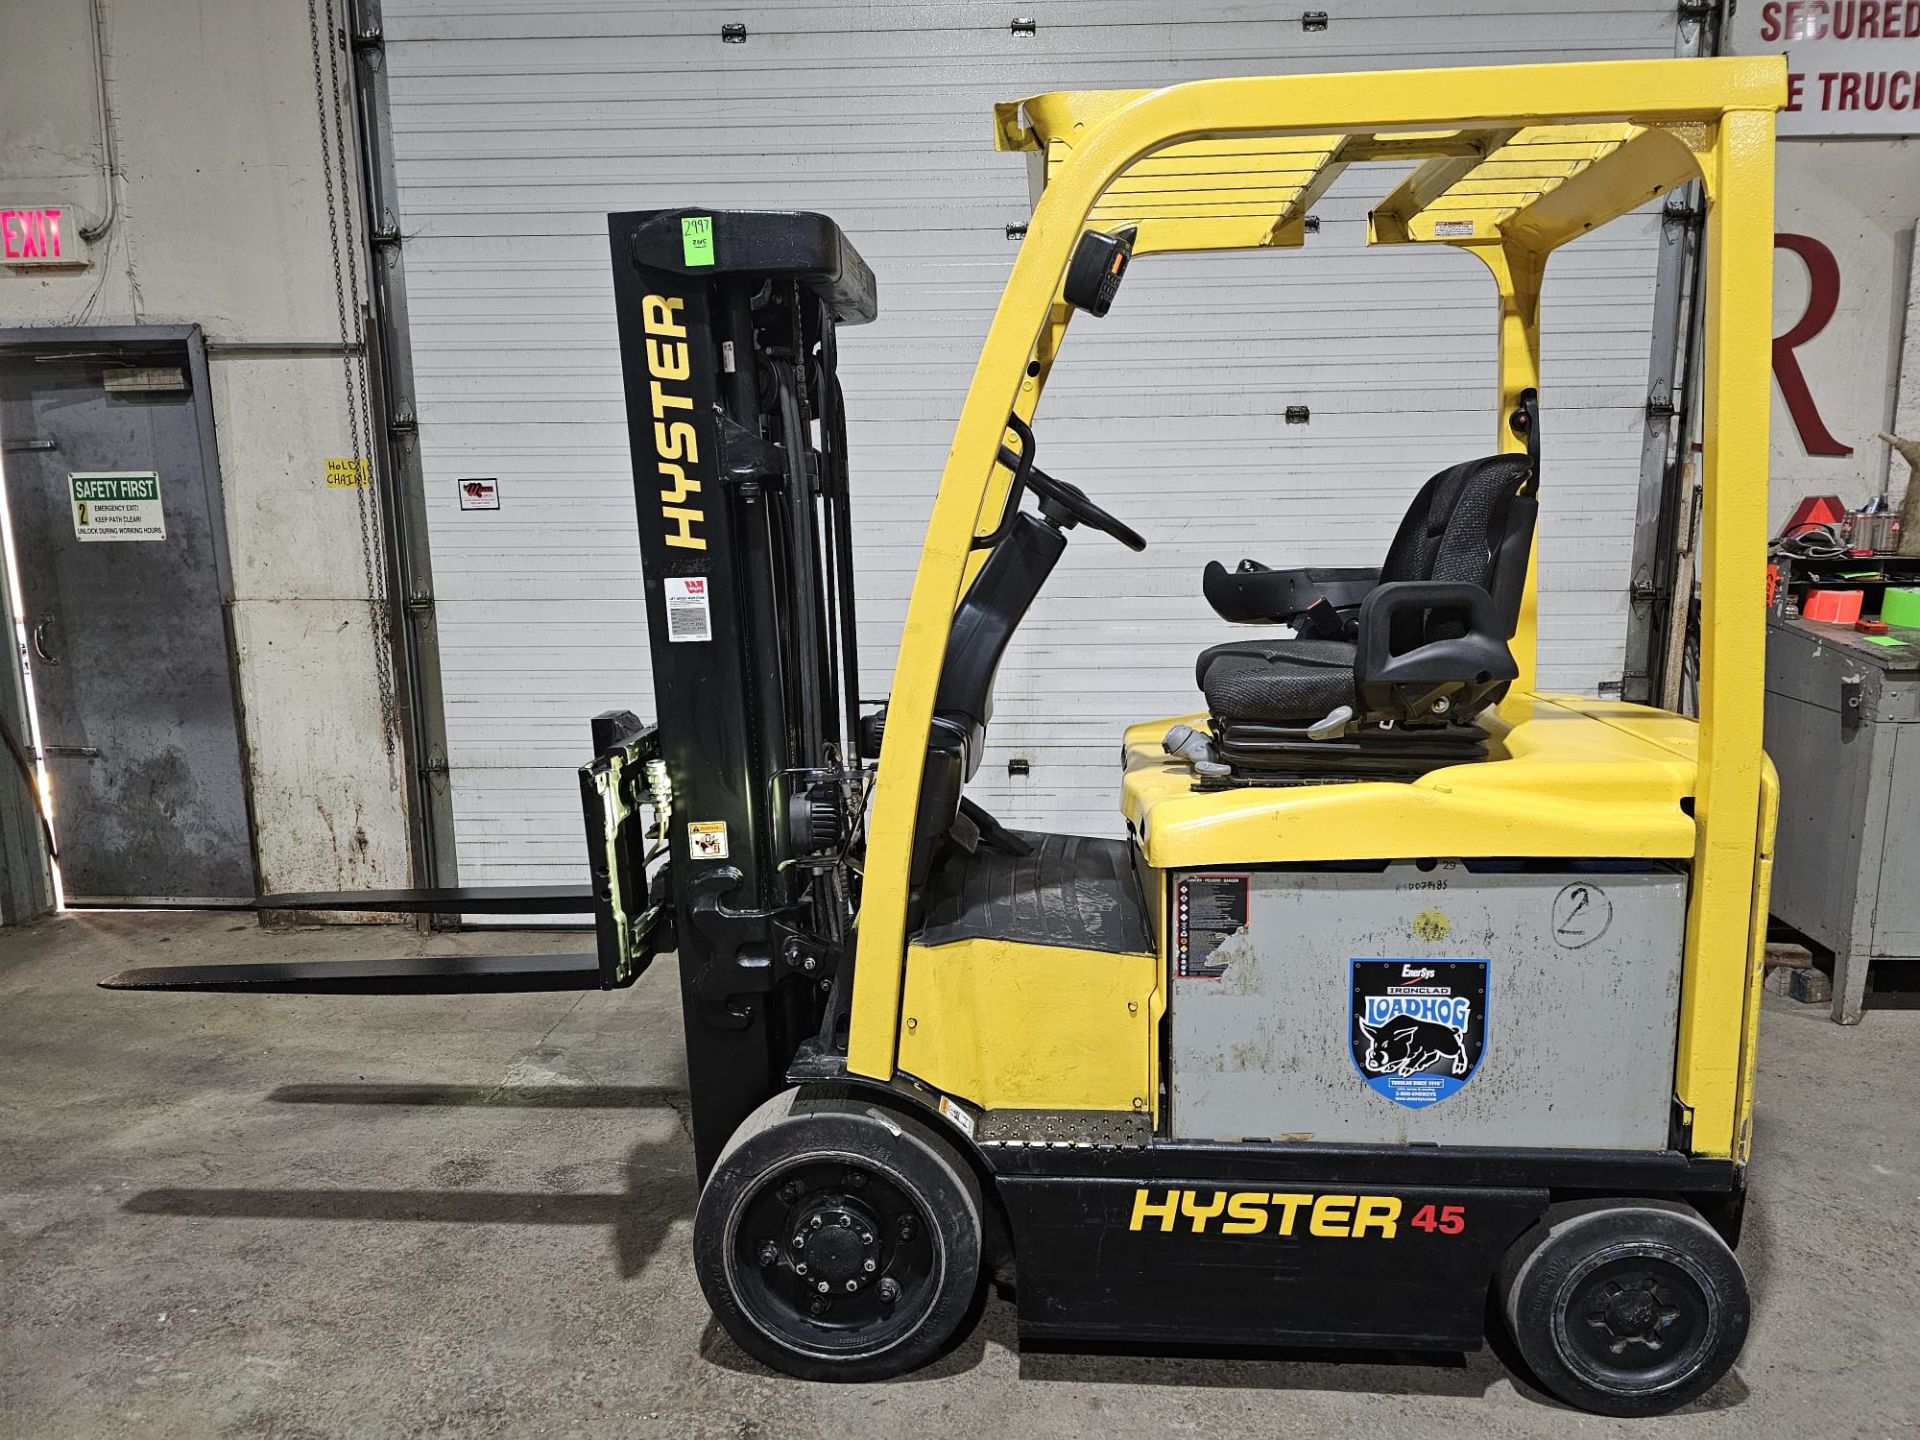 2015 Hyster 4,500lbs Capacity Forklift Electric 48V with sideshift & 3-STAGE MAST 189" load height